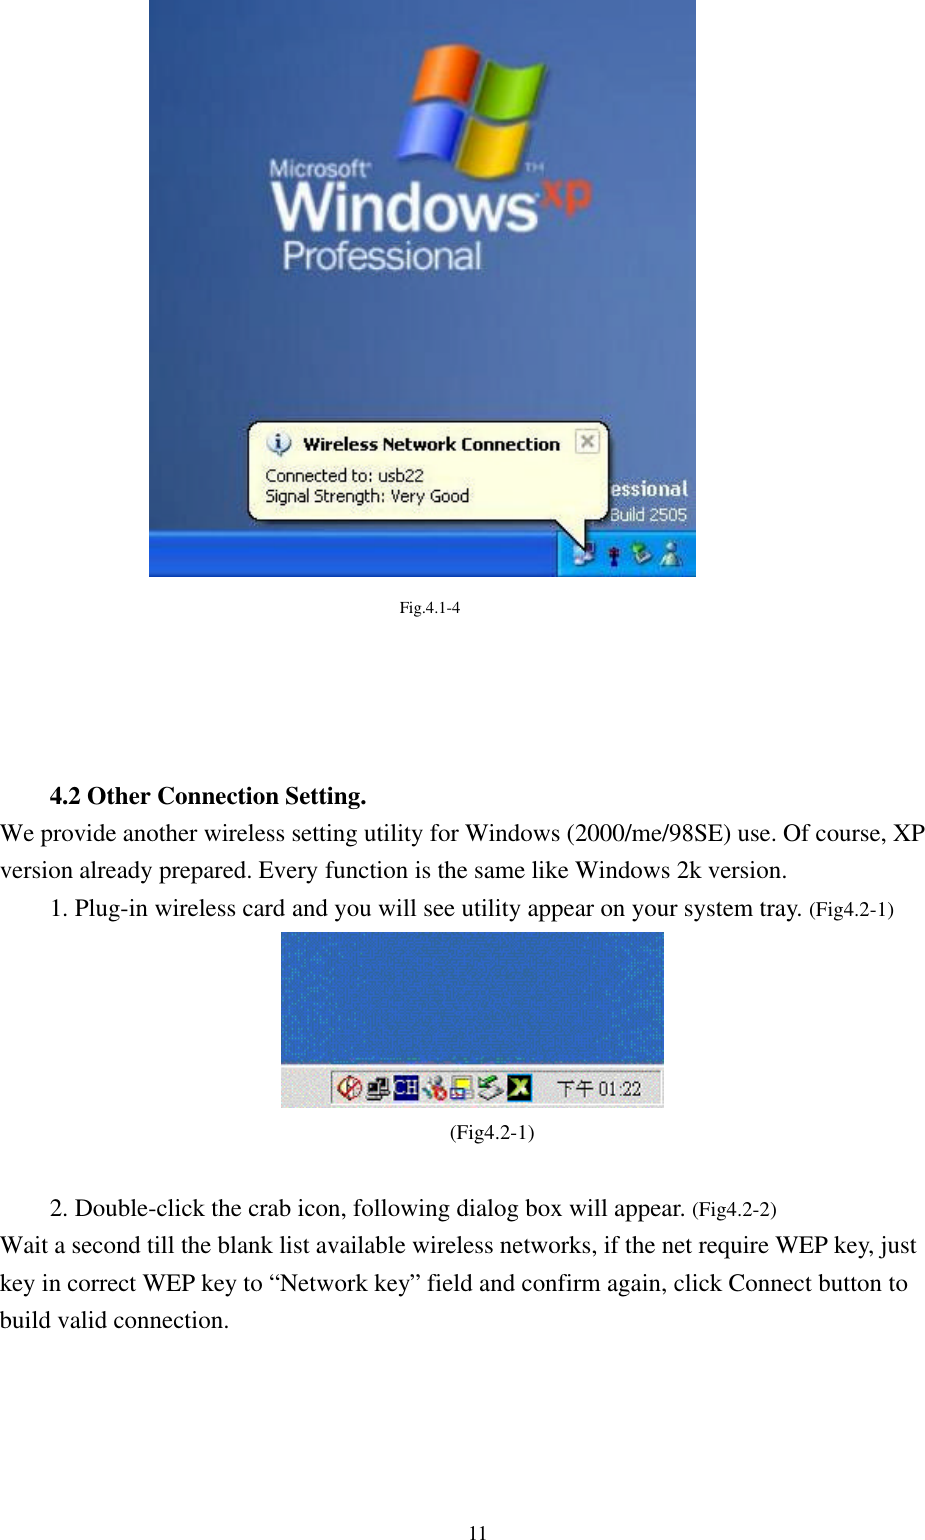 11Fig.4.1-44.2 Other Connection Setting.We provide another wireless setting utility for Windows (2000/me/98SE) use. Of course, XPversion already prepared. Every function is the same like Windows 2k version.1. Plug-in wireless card and you will see utility appear on your system tray. (Fig4.2-1)(Fig4.2-1)2. Double-click the crab icon, following dialog box will appear. (Fig4.2-2)Wait a second till the blank list available wireless networks, if the net require WEP key, justkey in correct WEP key to “Network key” field and confirm again, click Connect button tobuild valid connection.